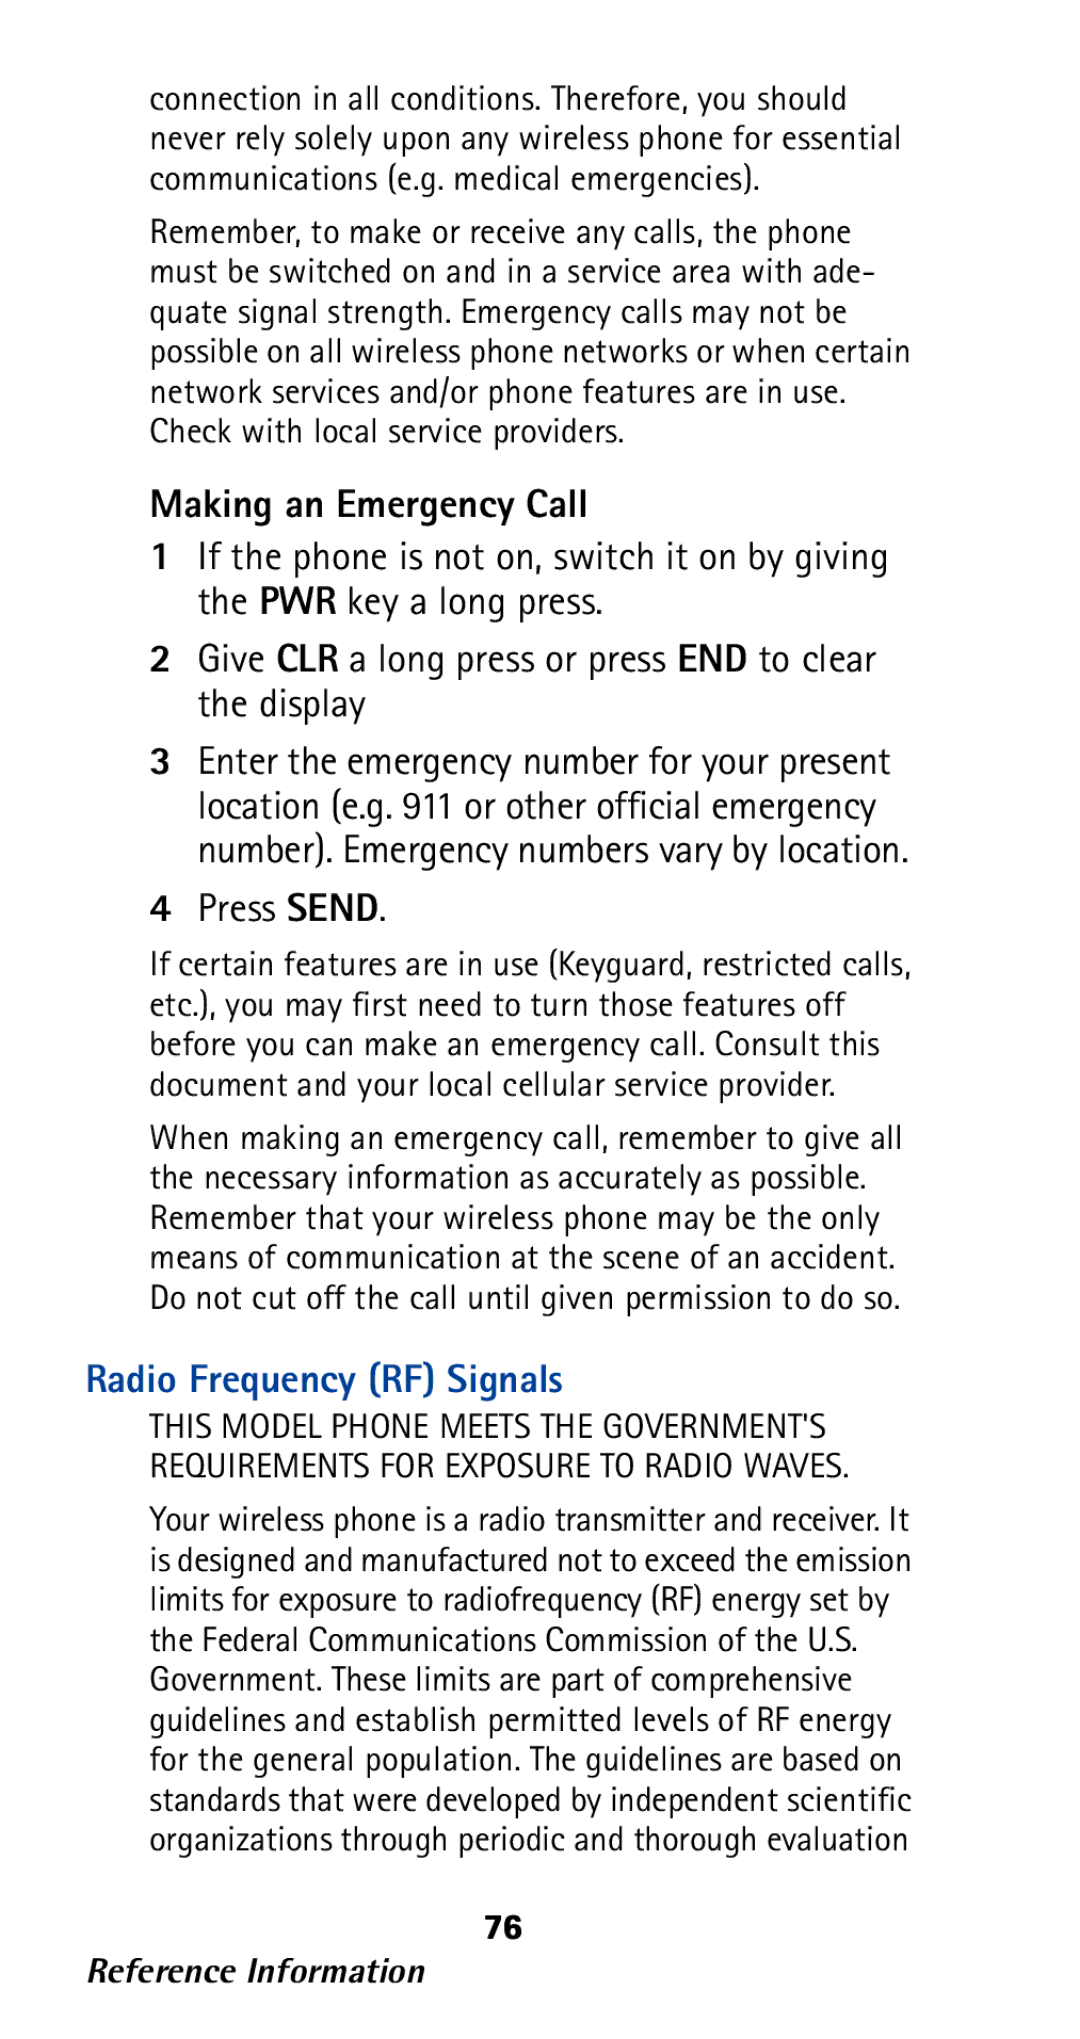 Nokia 282 owner manual Making an Emergency Call, Radio Frequency RF Signals 